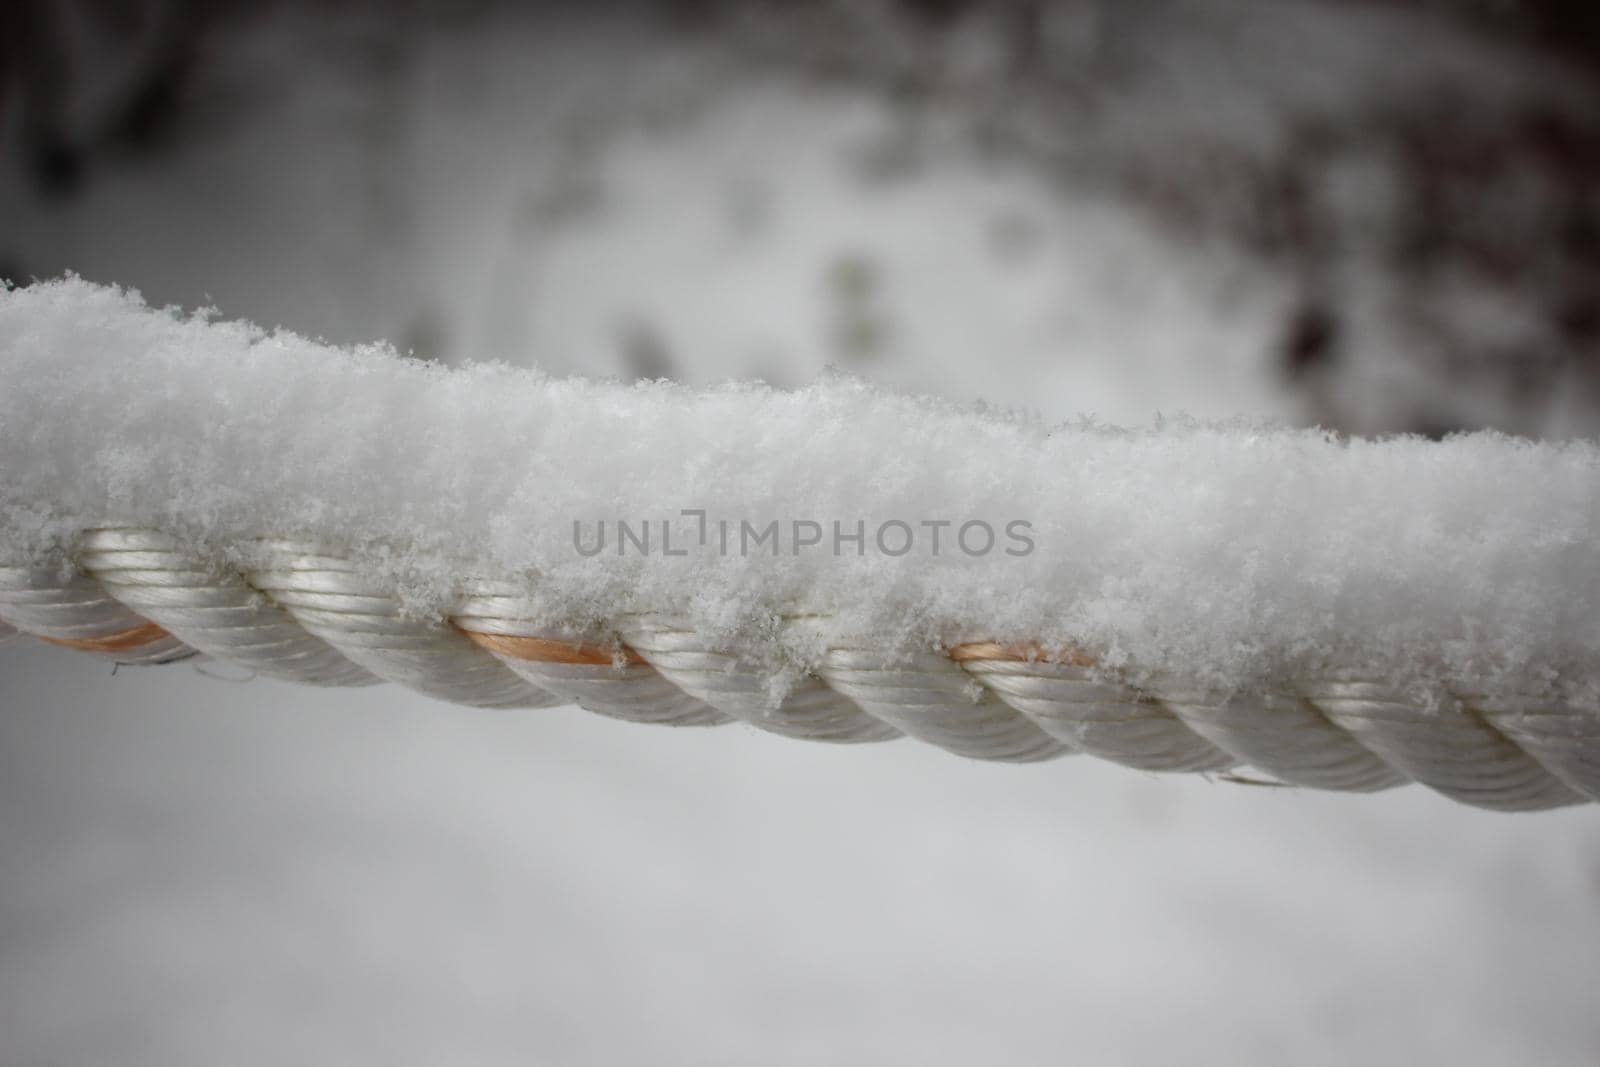 Snow flakes on rope in winter snowfall. Closeup macro view of snow on rope